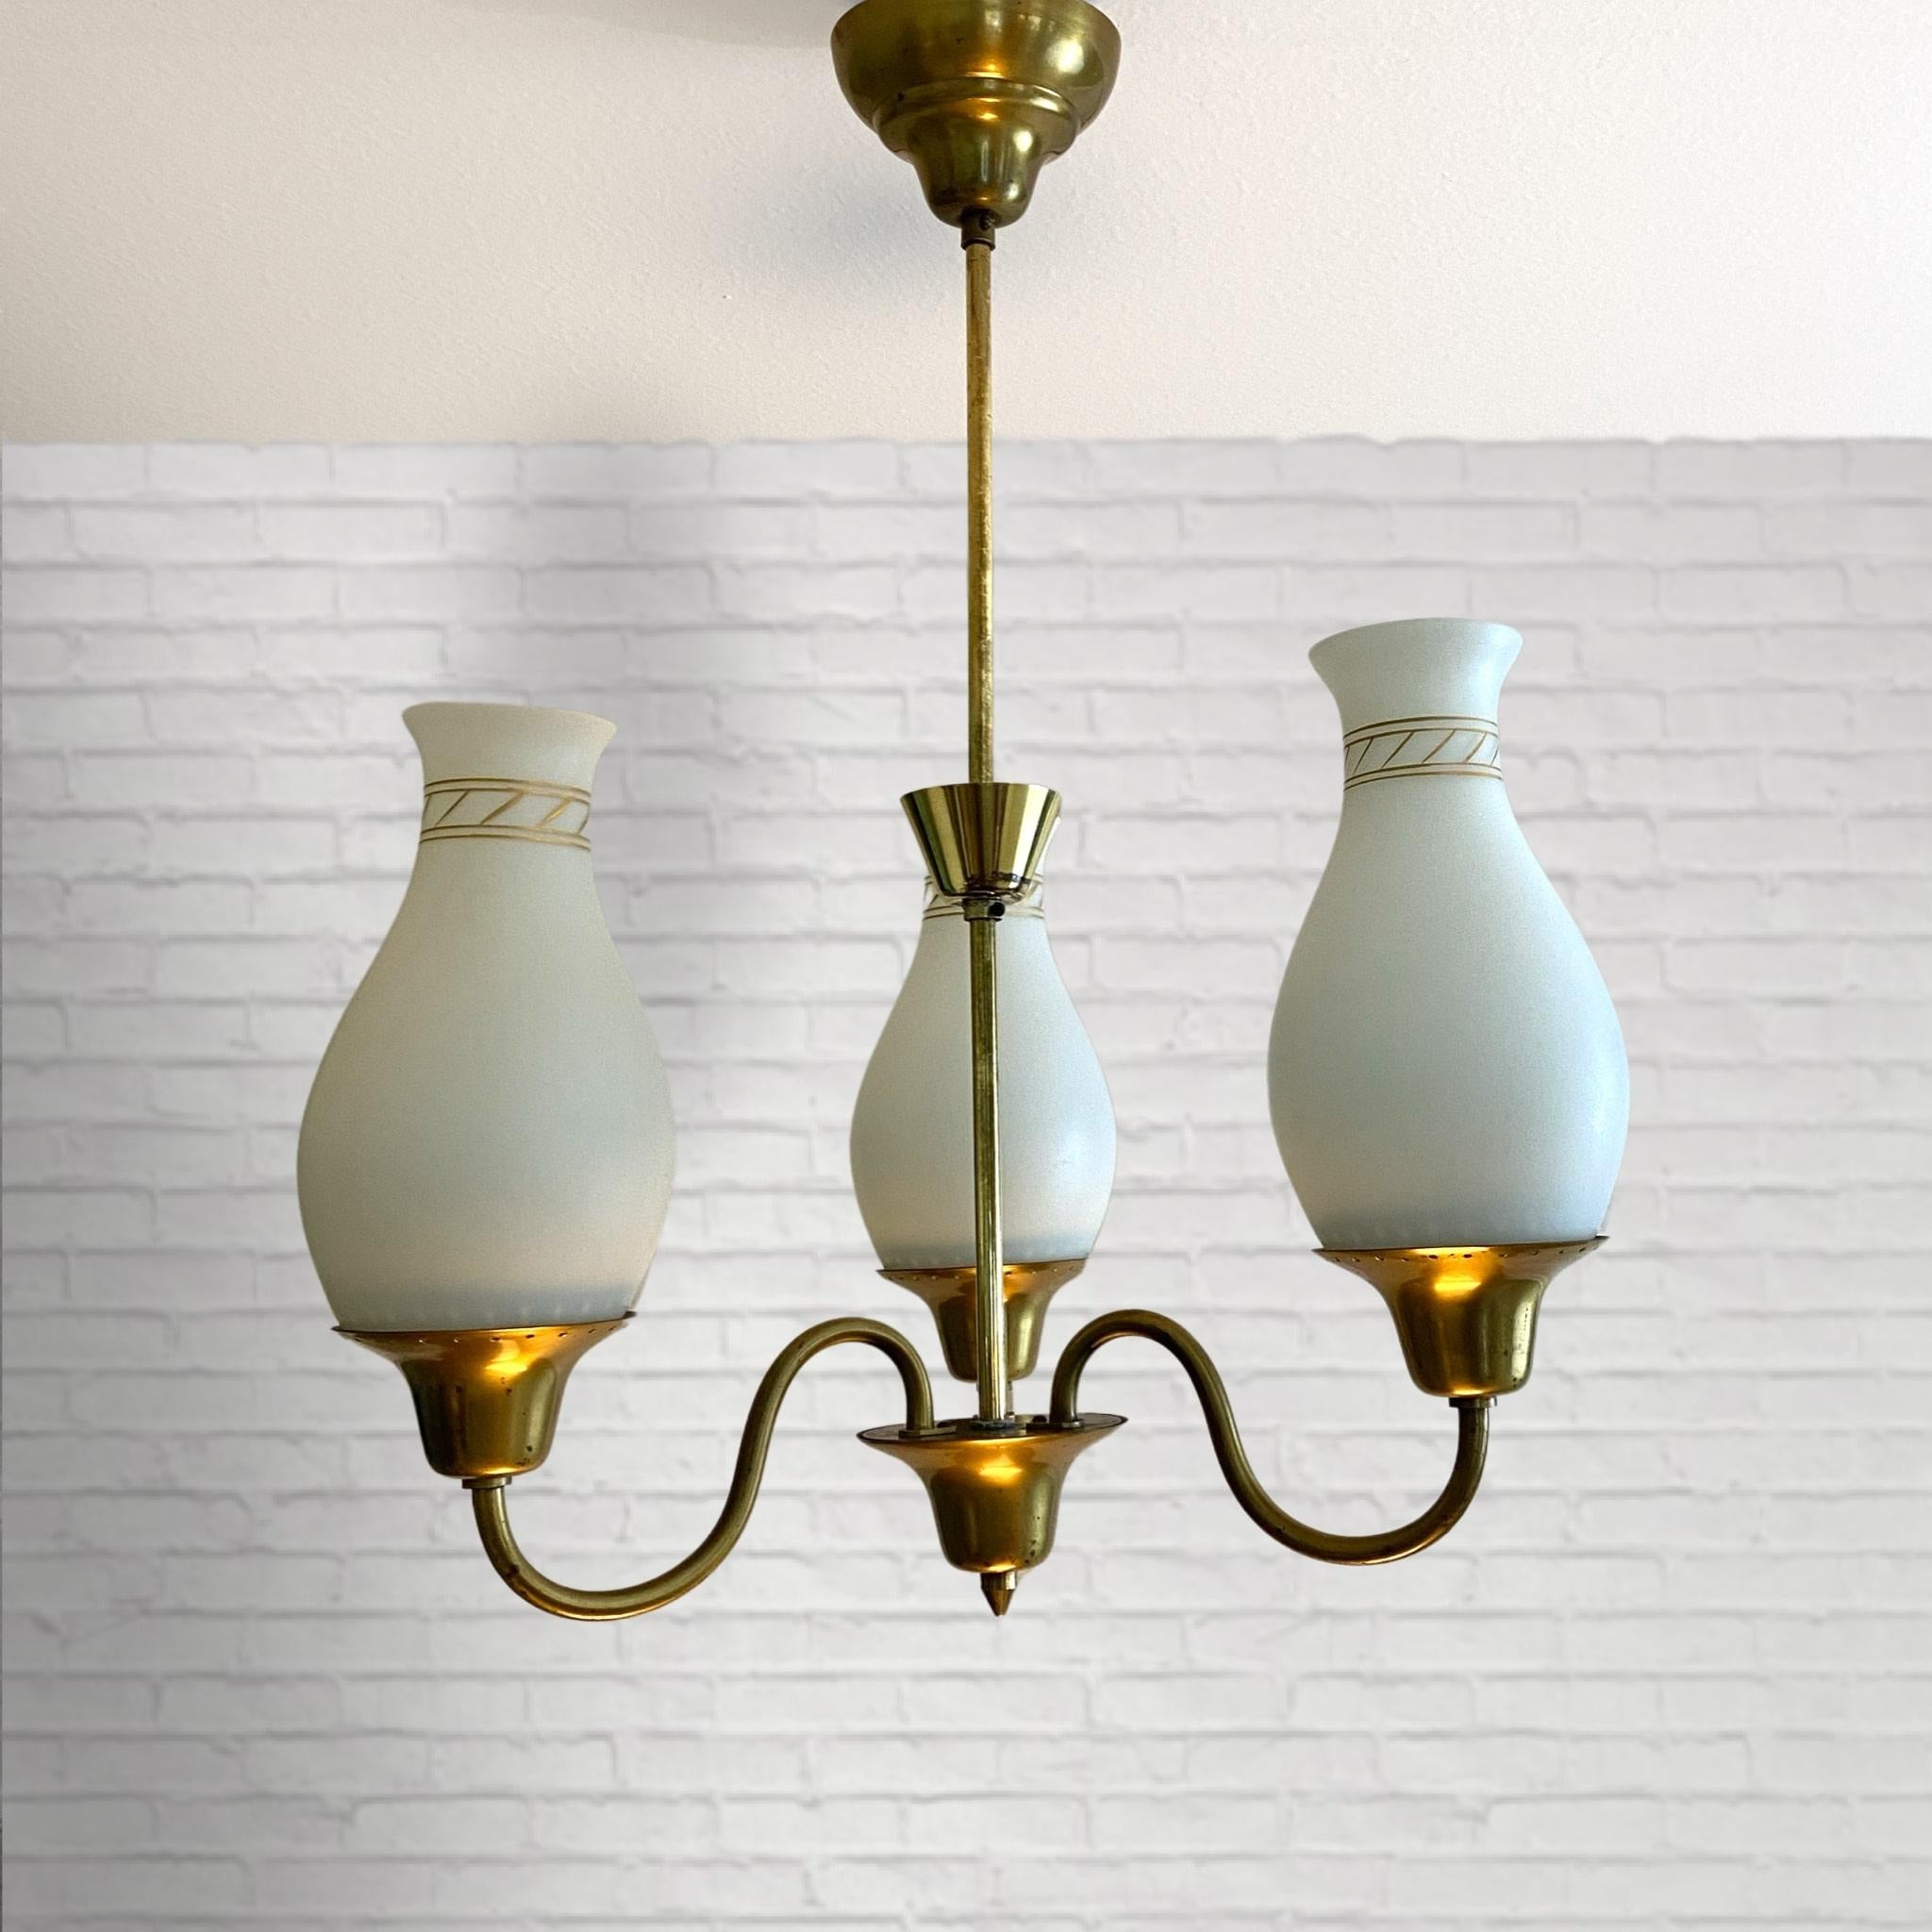 Swedish 1940s pendant lamp made from brass with three curved arms holding bell-shaped shades in opal glass with a decorative golden pattern. The small brass bowl placed on the stem reflects the light in all directions. With its minimalistic shape